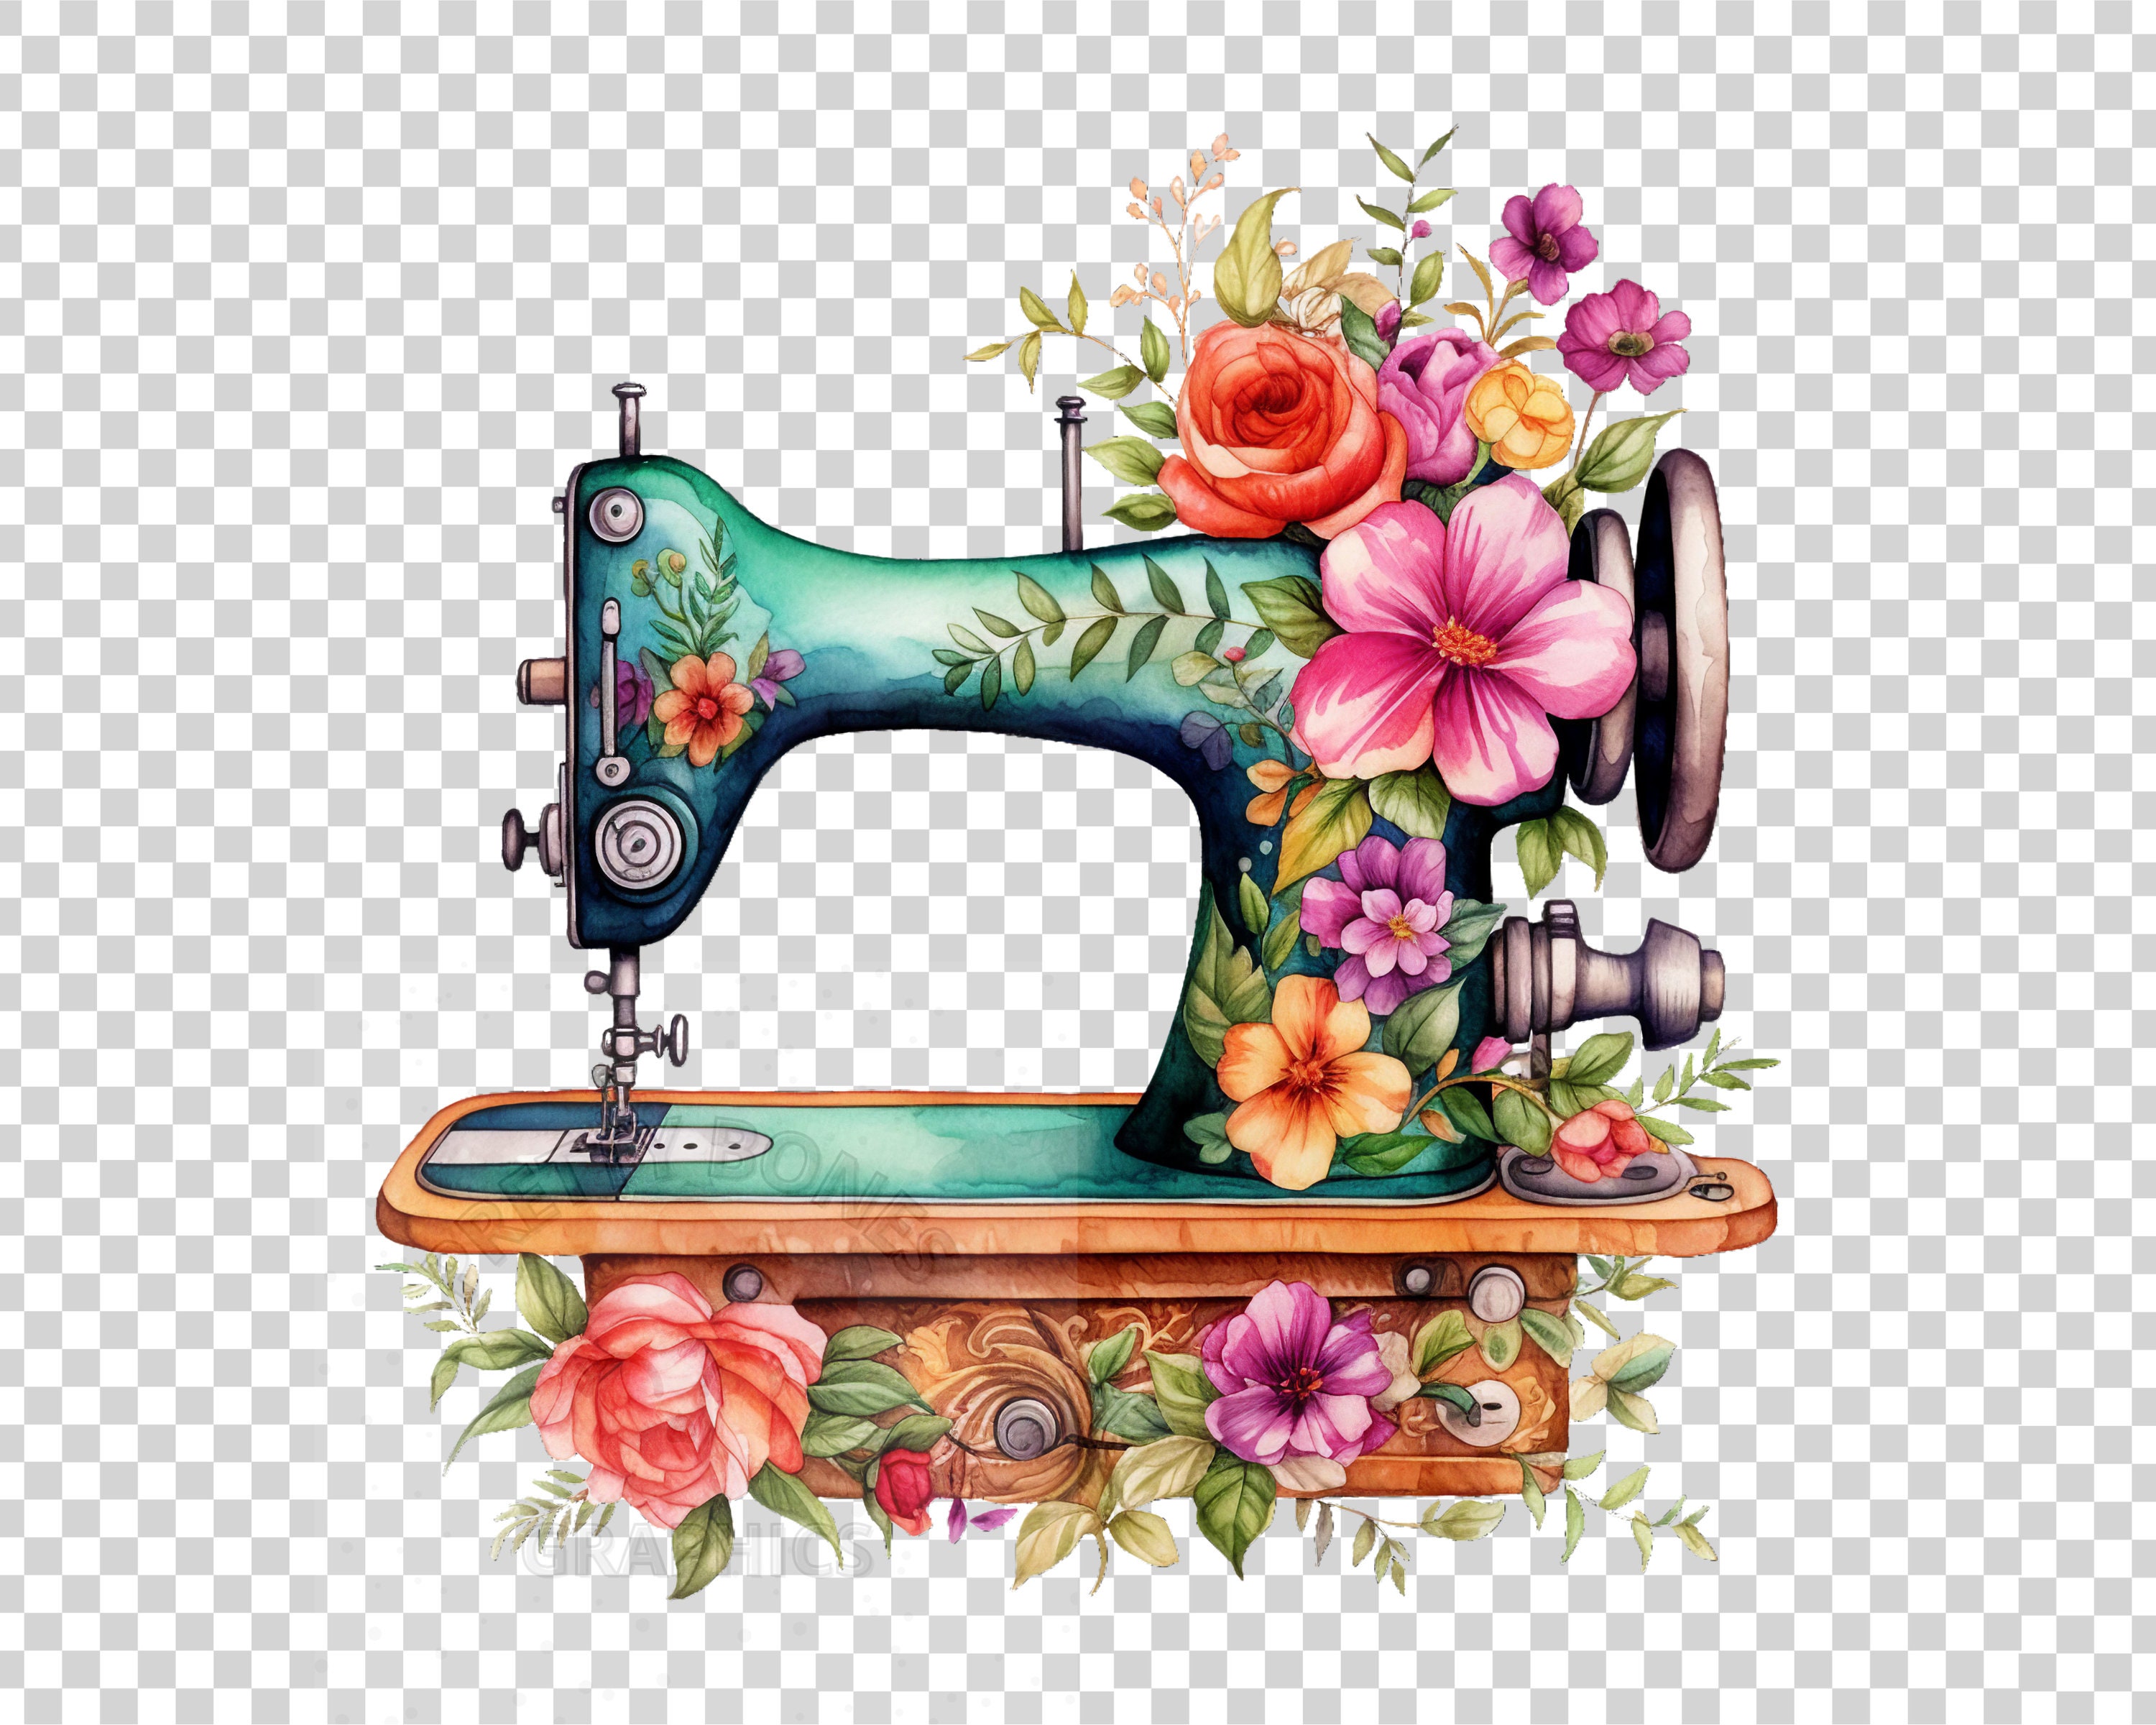 Floral Sewing Machine Clipart PNG Instant Download File - Etsy